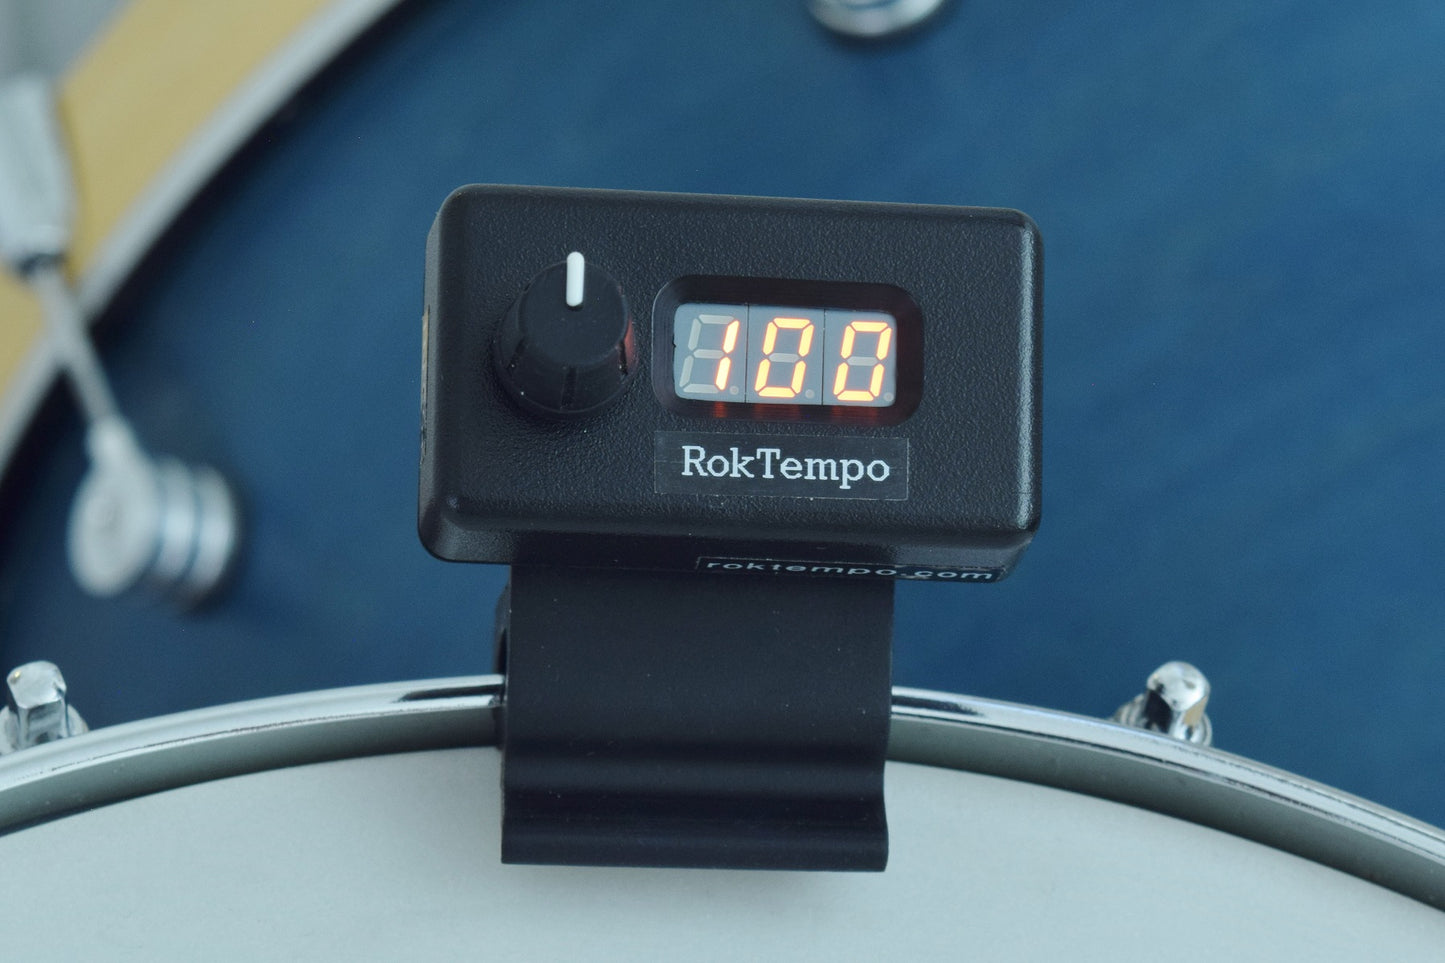 RokTempo®
Tempometer for Drummers